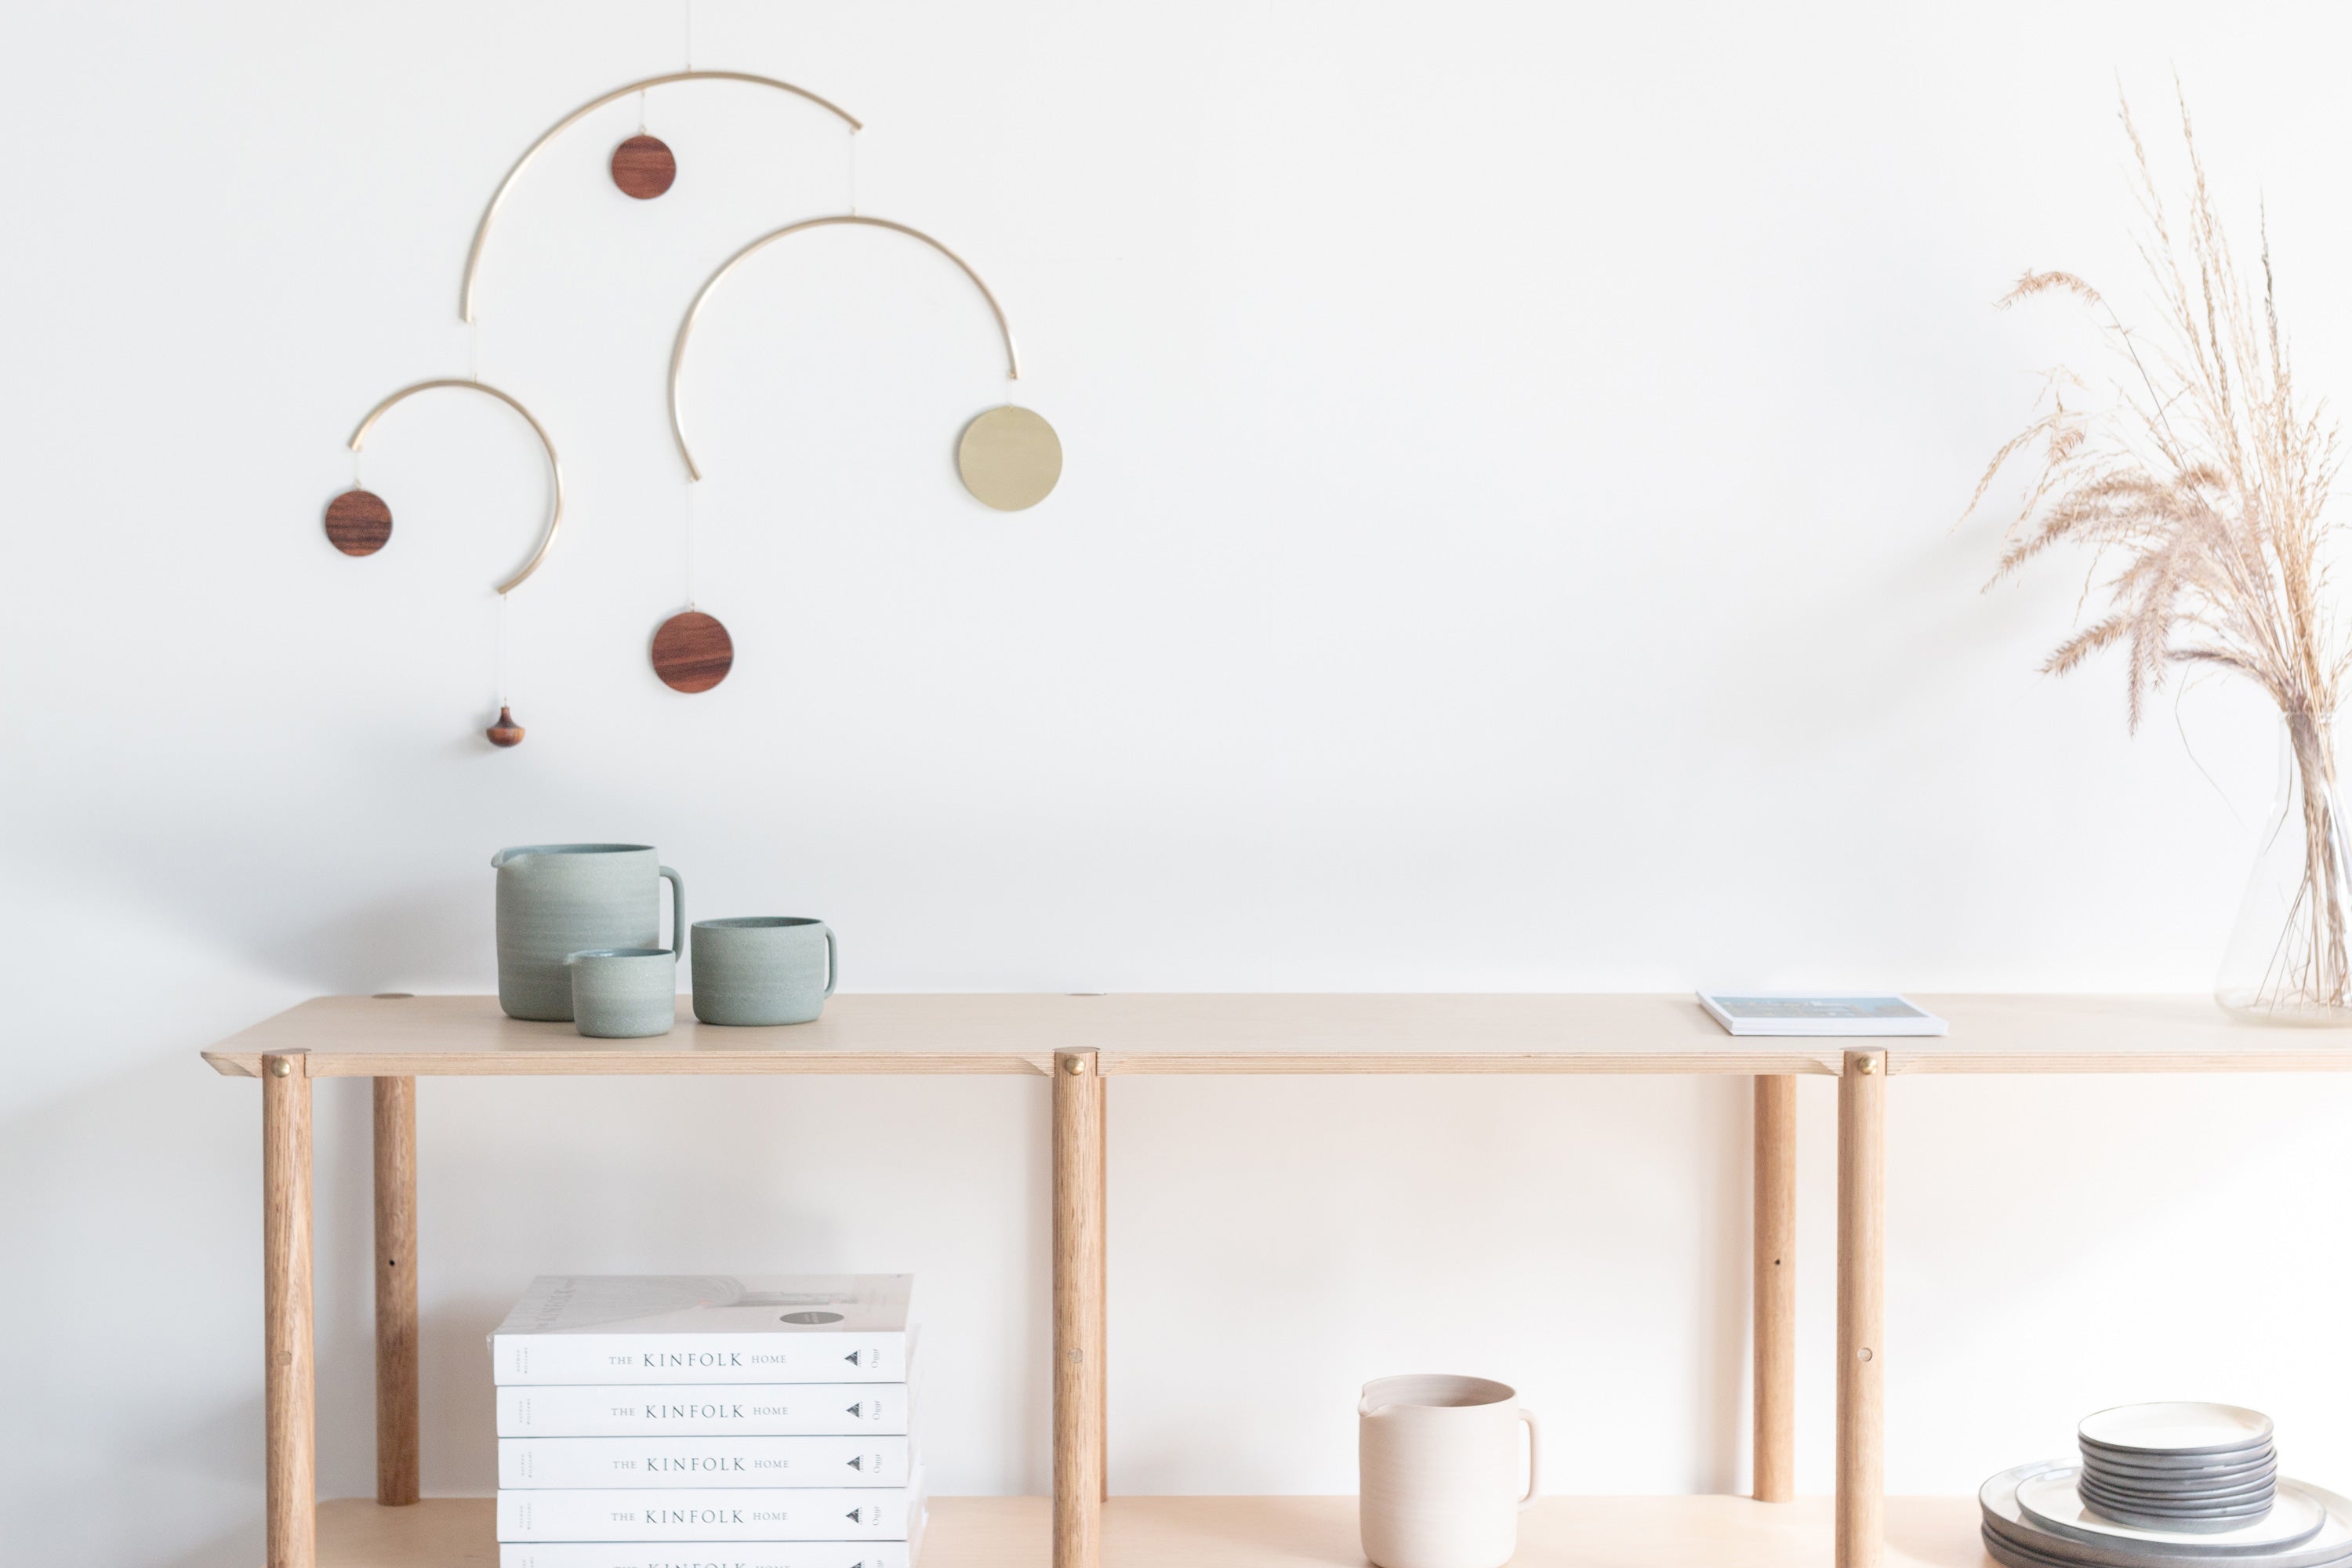 Locally made minimalist Australian furniture - our favourite Melbourne-made pieces